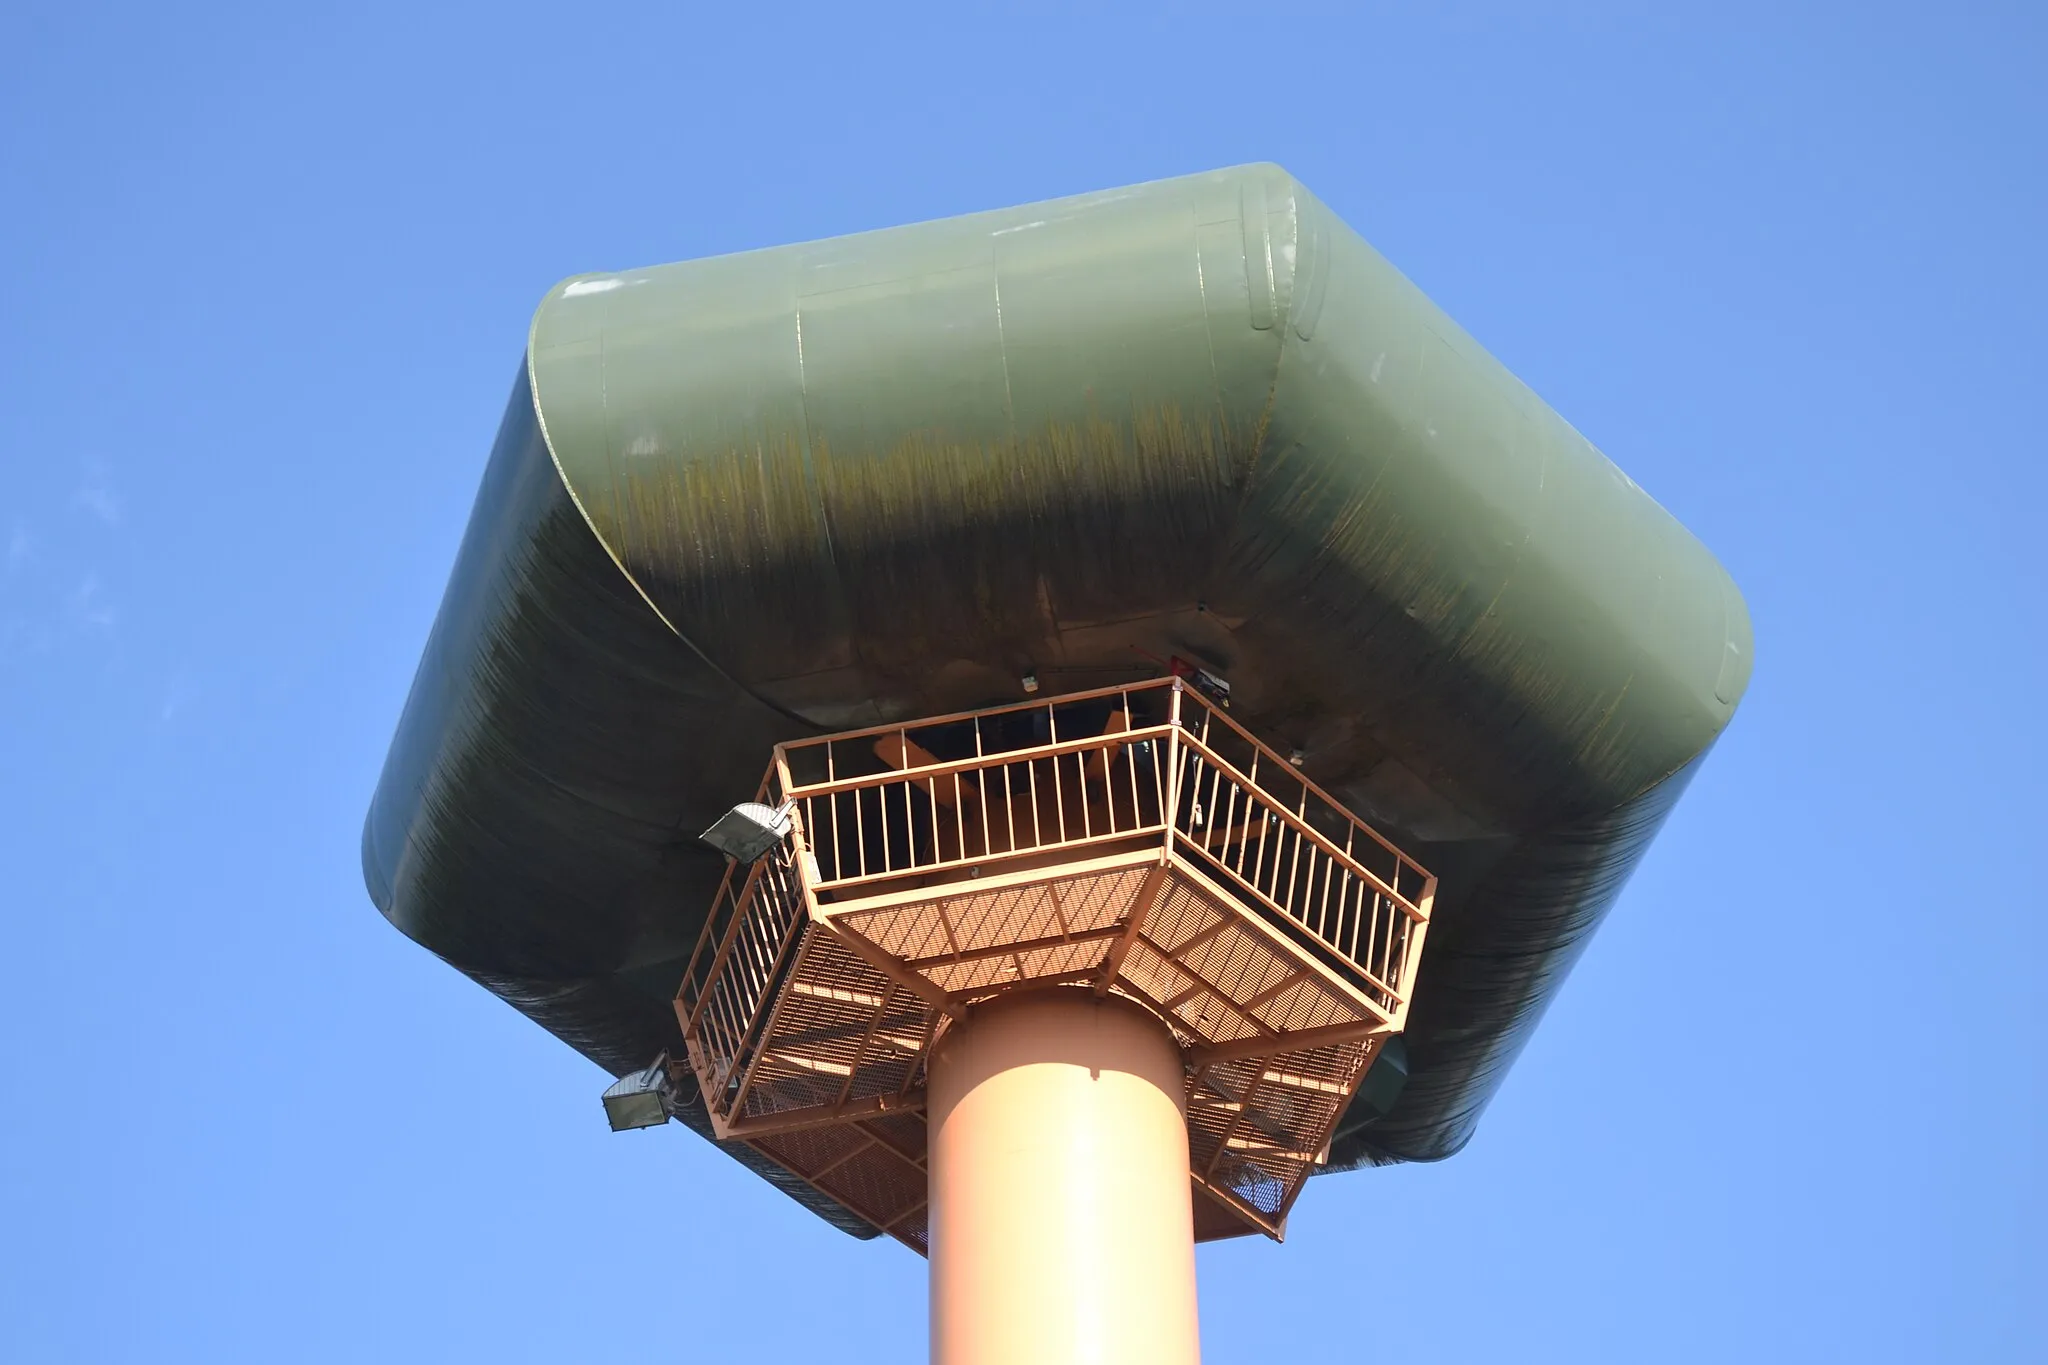 Photo showing: Container of Parkano water tower in Finland